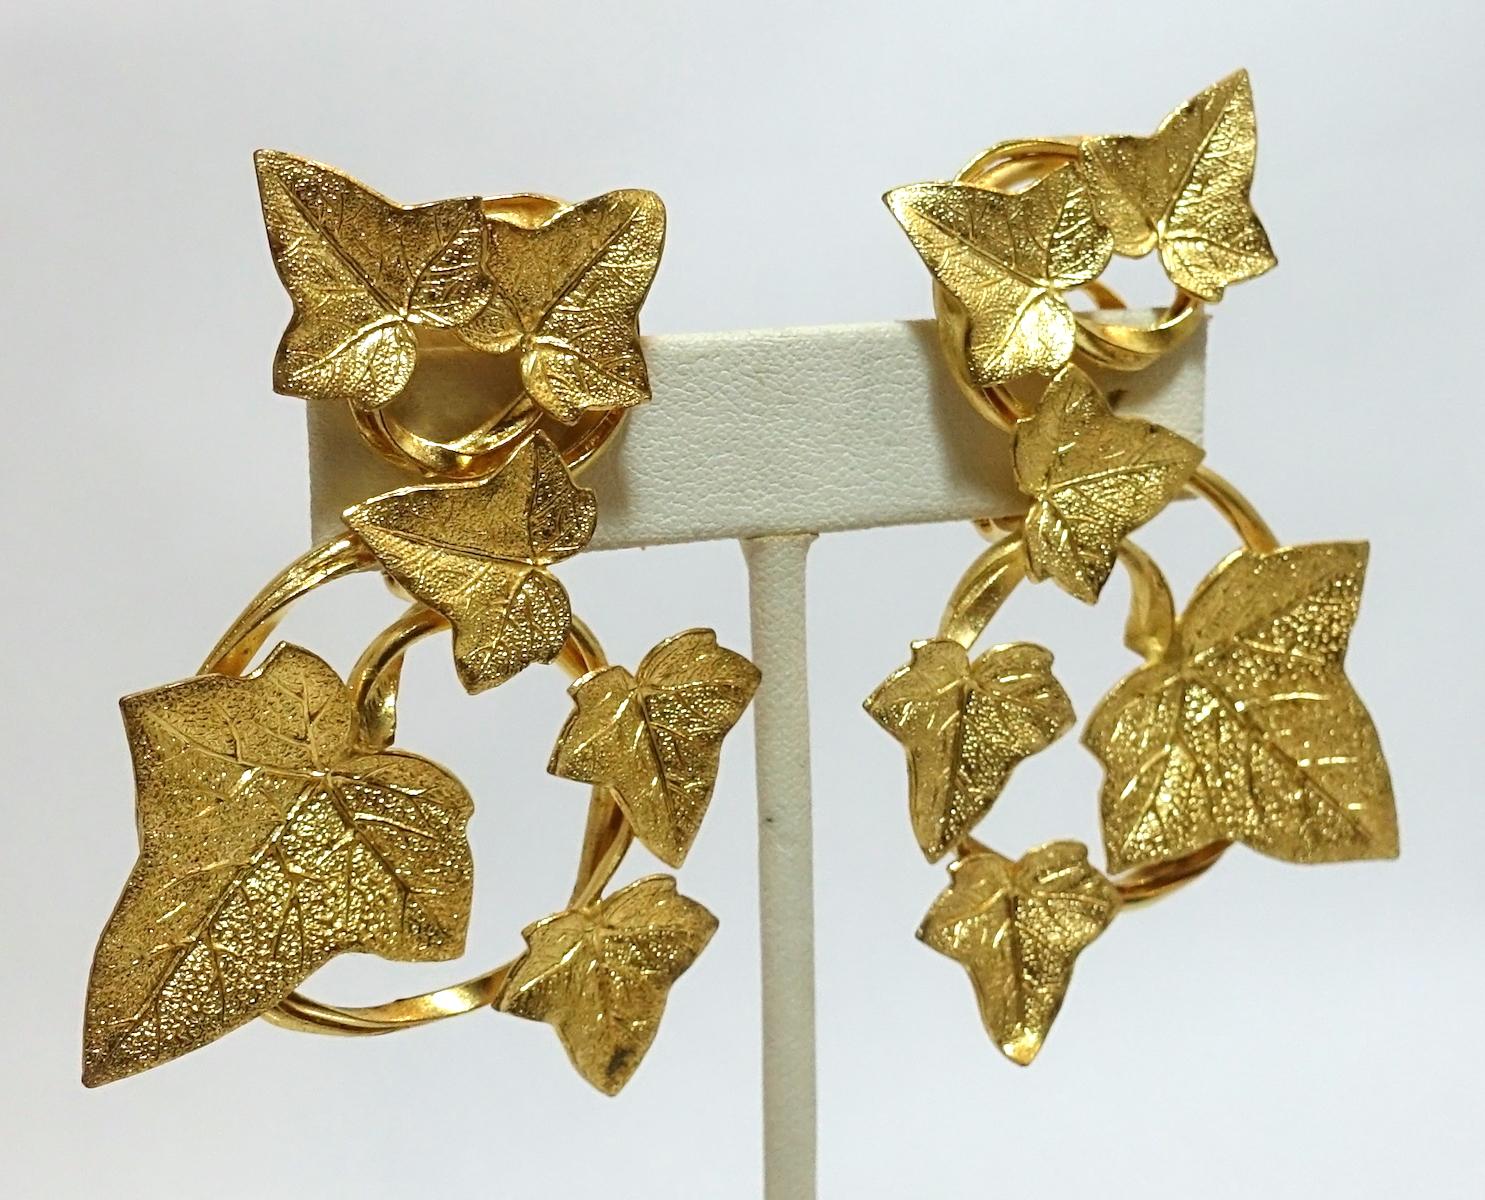 These vintage signed Dominique Aurientis Paris earrings feature a heavily etched floral design in a gold tone setting.  These clip earrings measure 2-1/2” x 1-3/4” and are signed “Dominique Aurientis Paris”. They are in excellent condition.